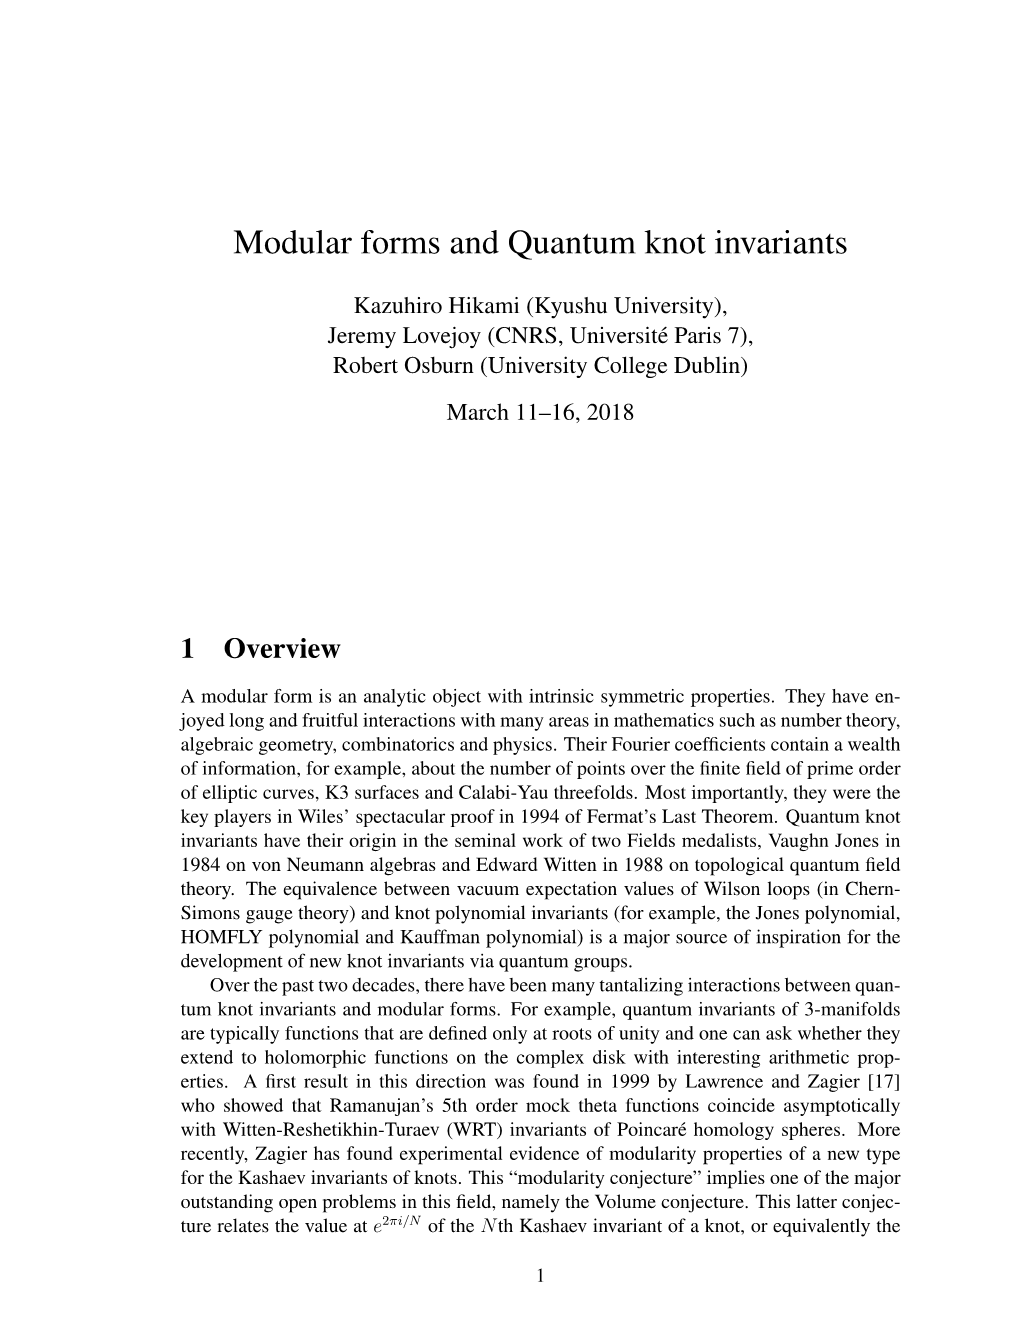 Modular Forms and Quantum Knot Invariants